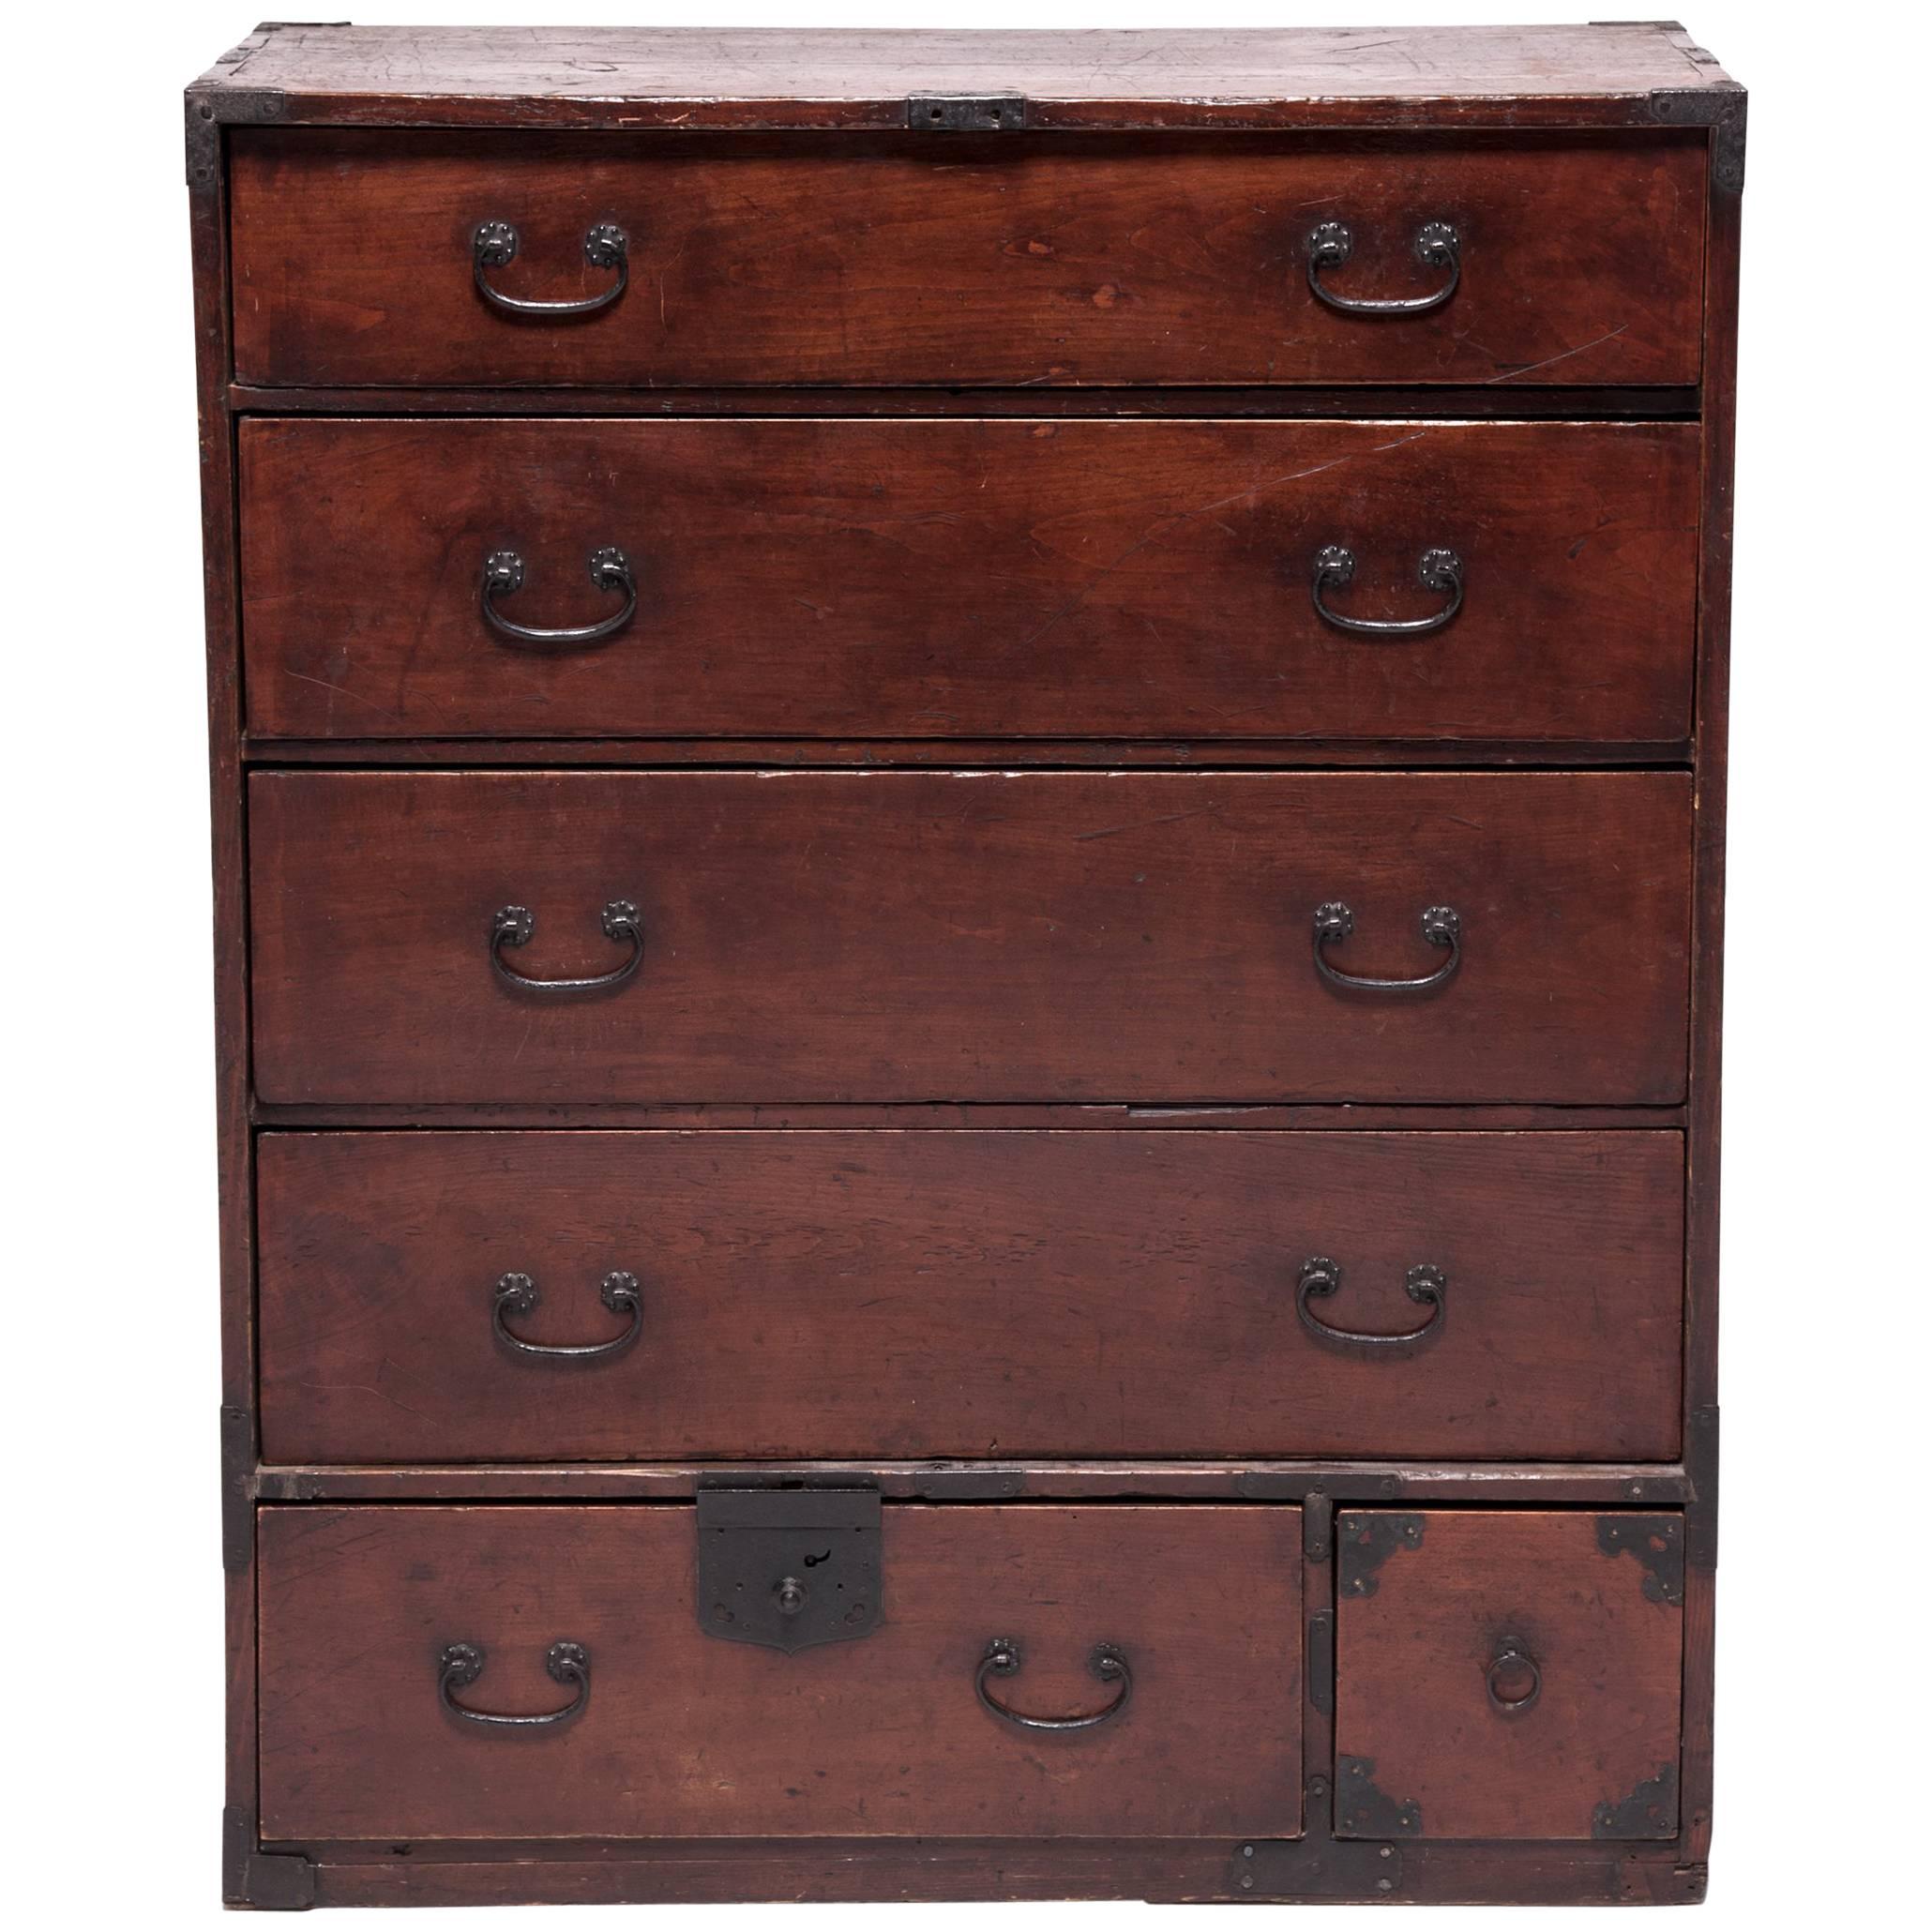 Early 20th Century Japanese Tansu Chest